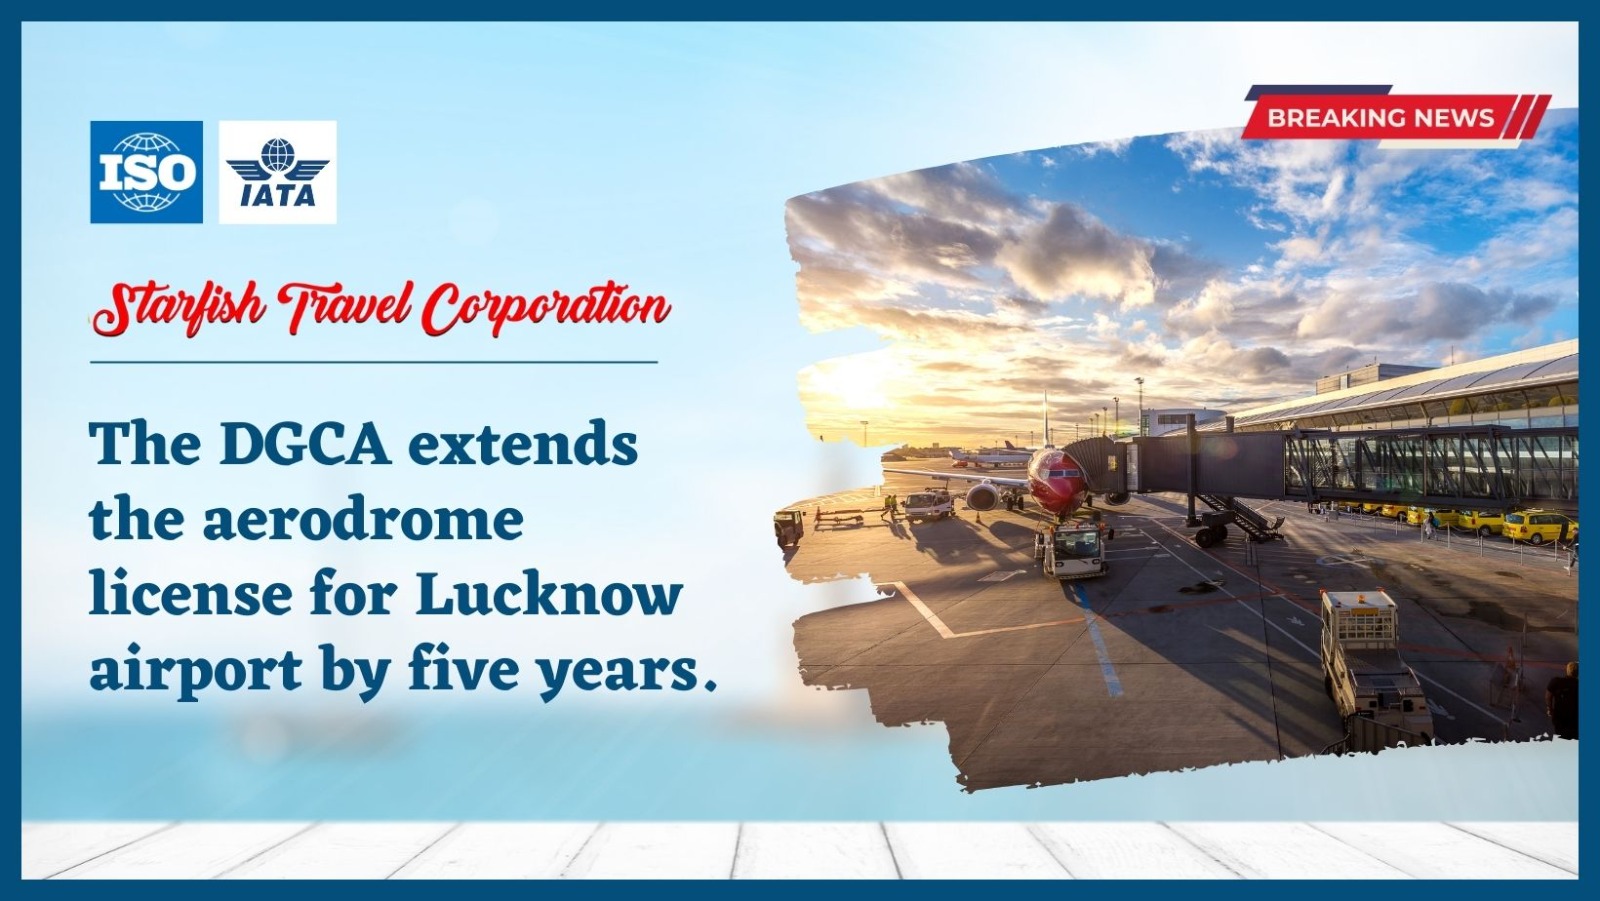 The DGCA extends the aerodrome license for Lucknow airport by five years.